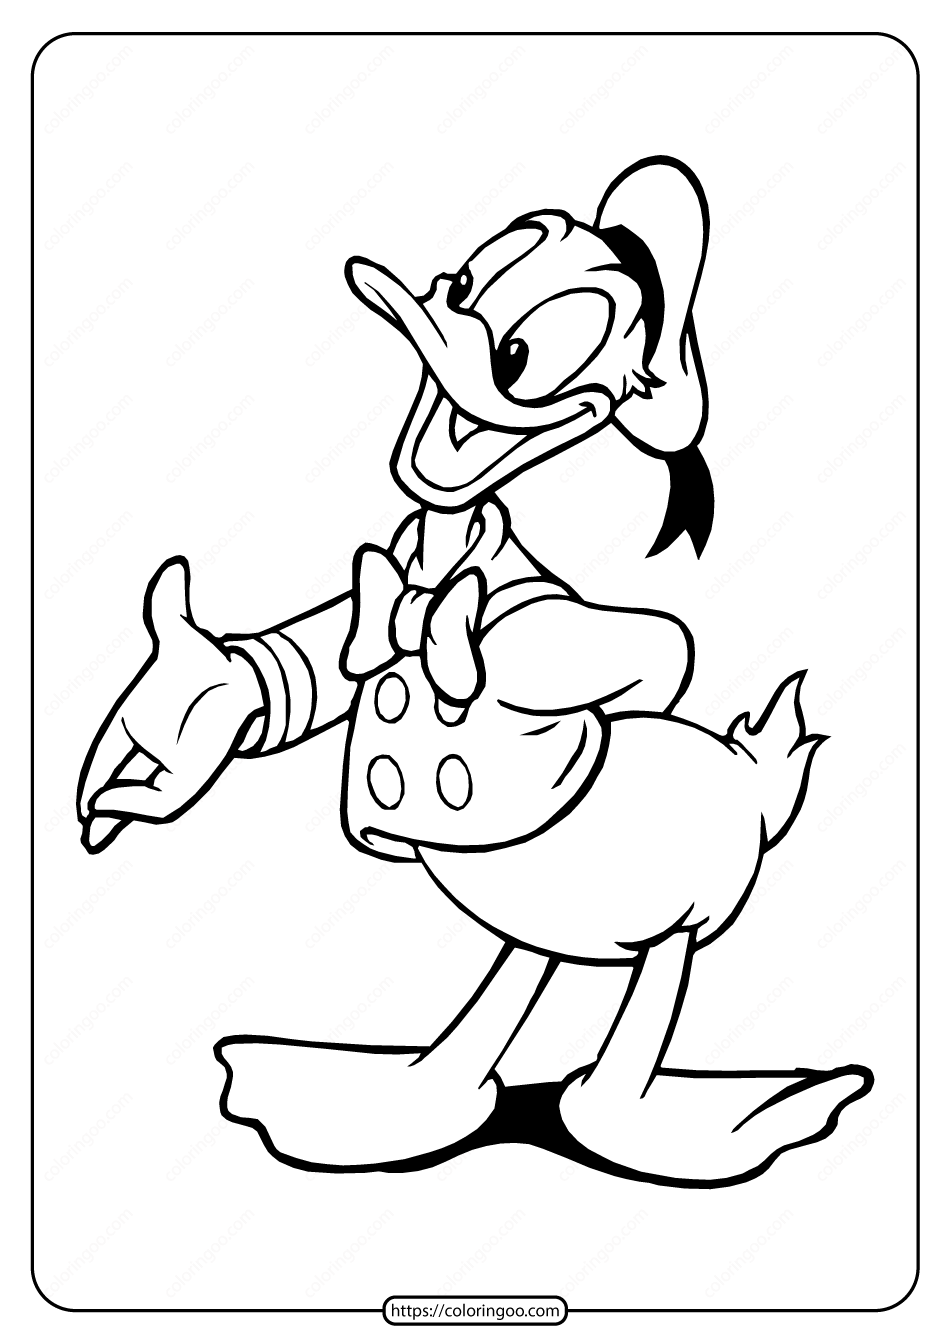 Free Printable Donald Duck Pdf Coloring Page 12